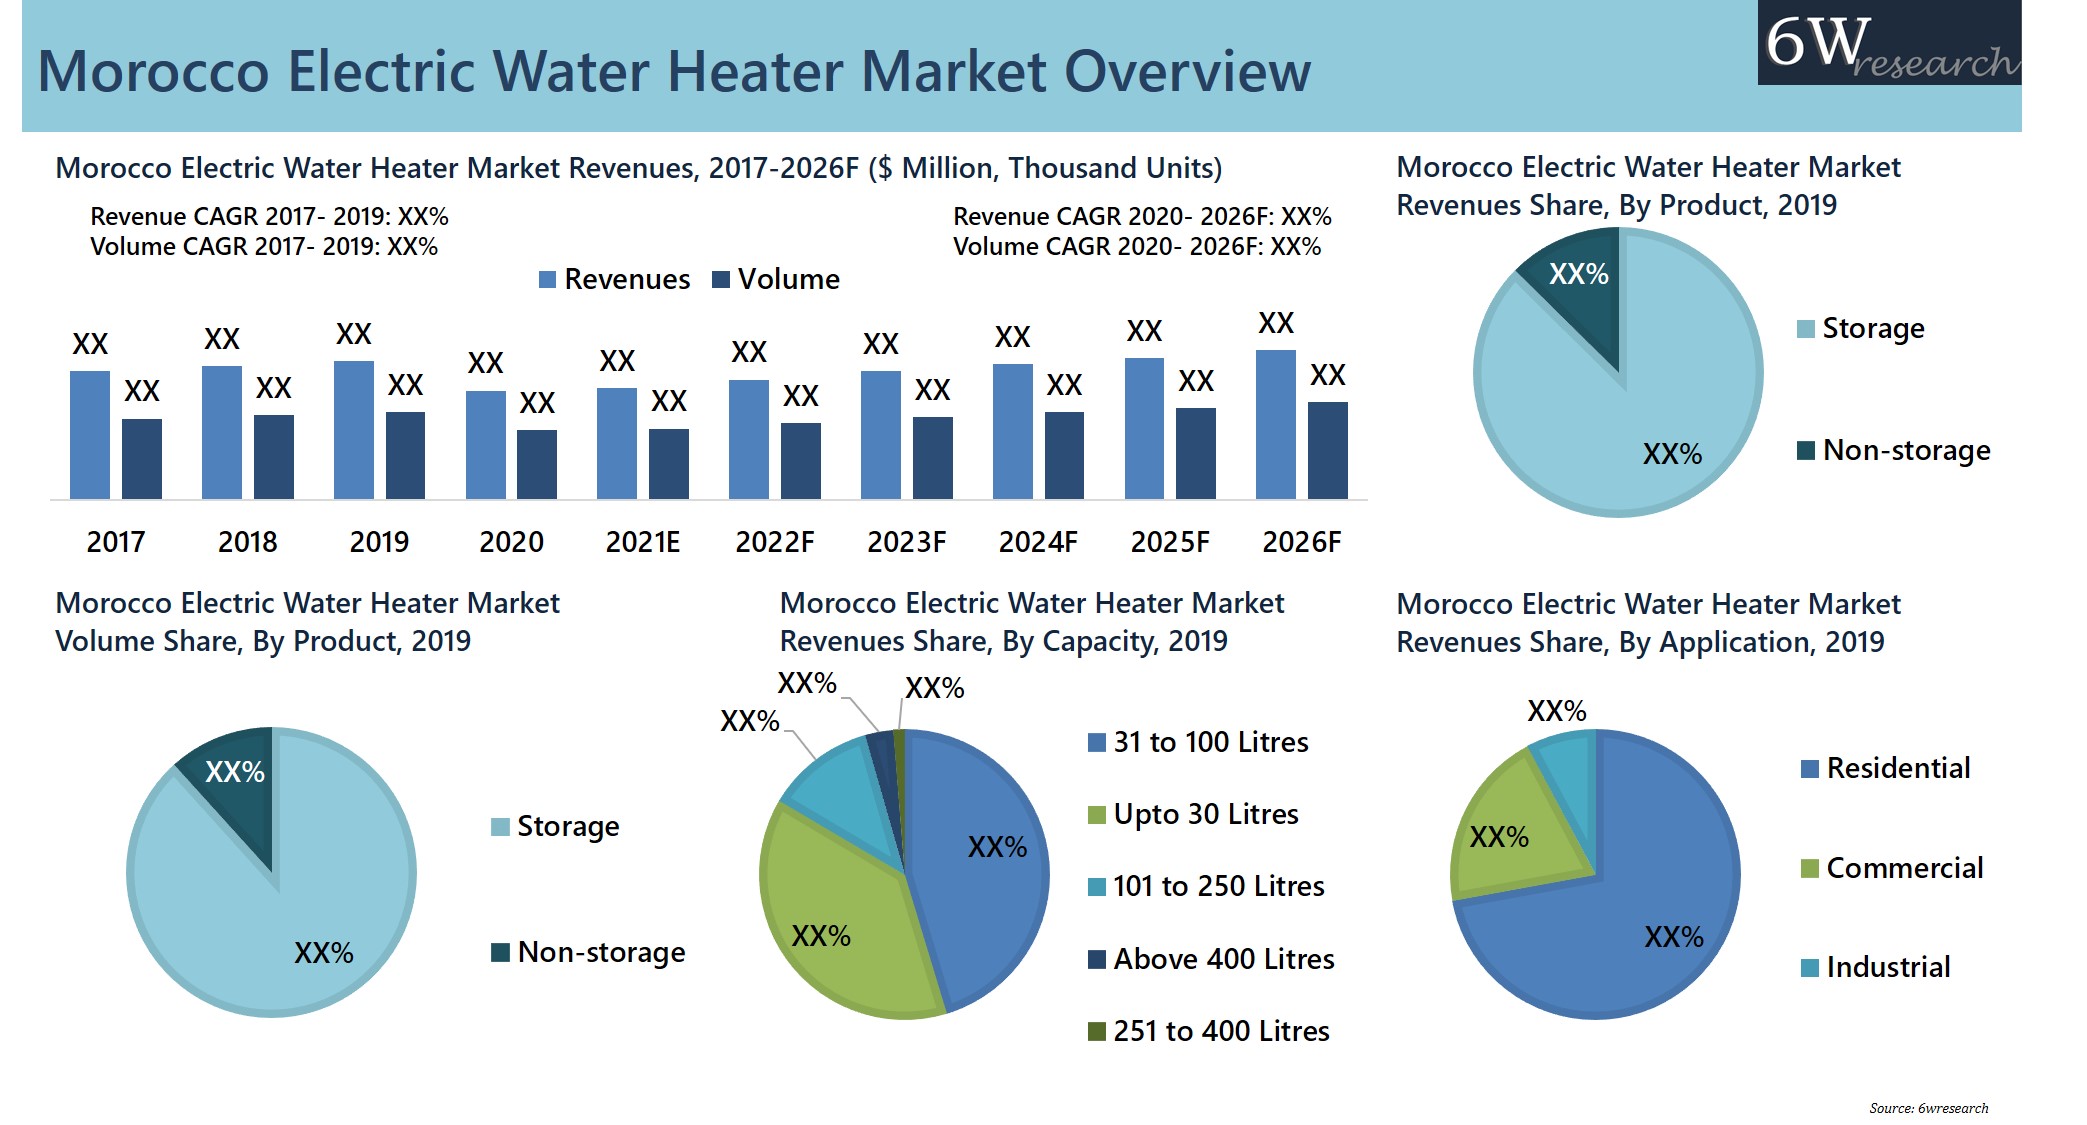 Morocco Electric Water Heater Market